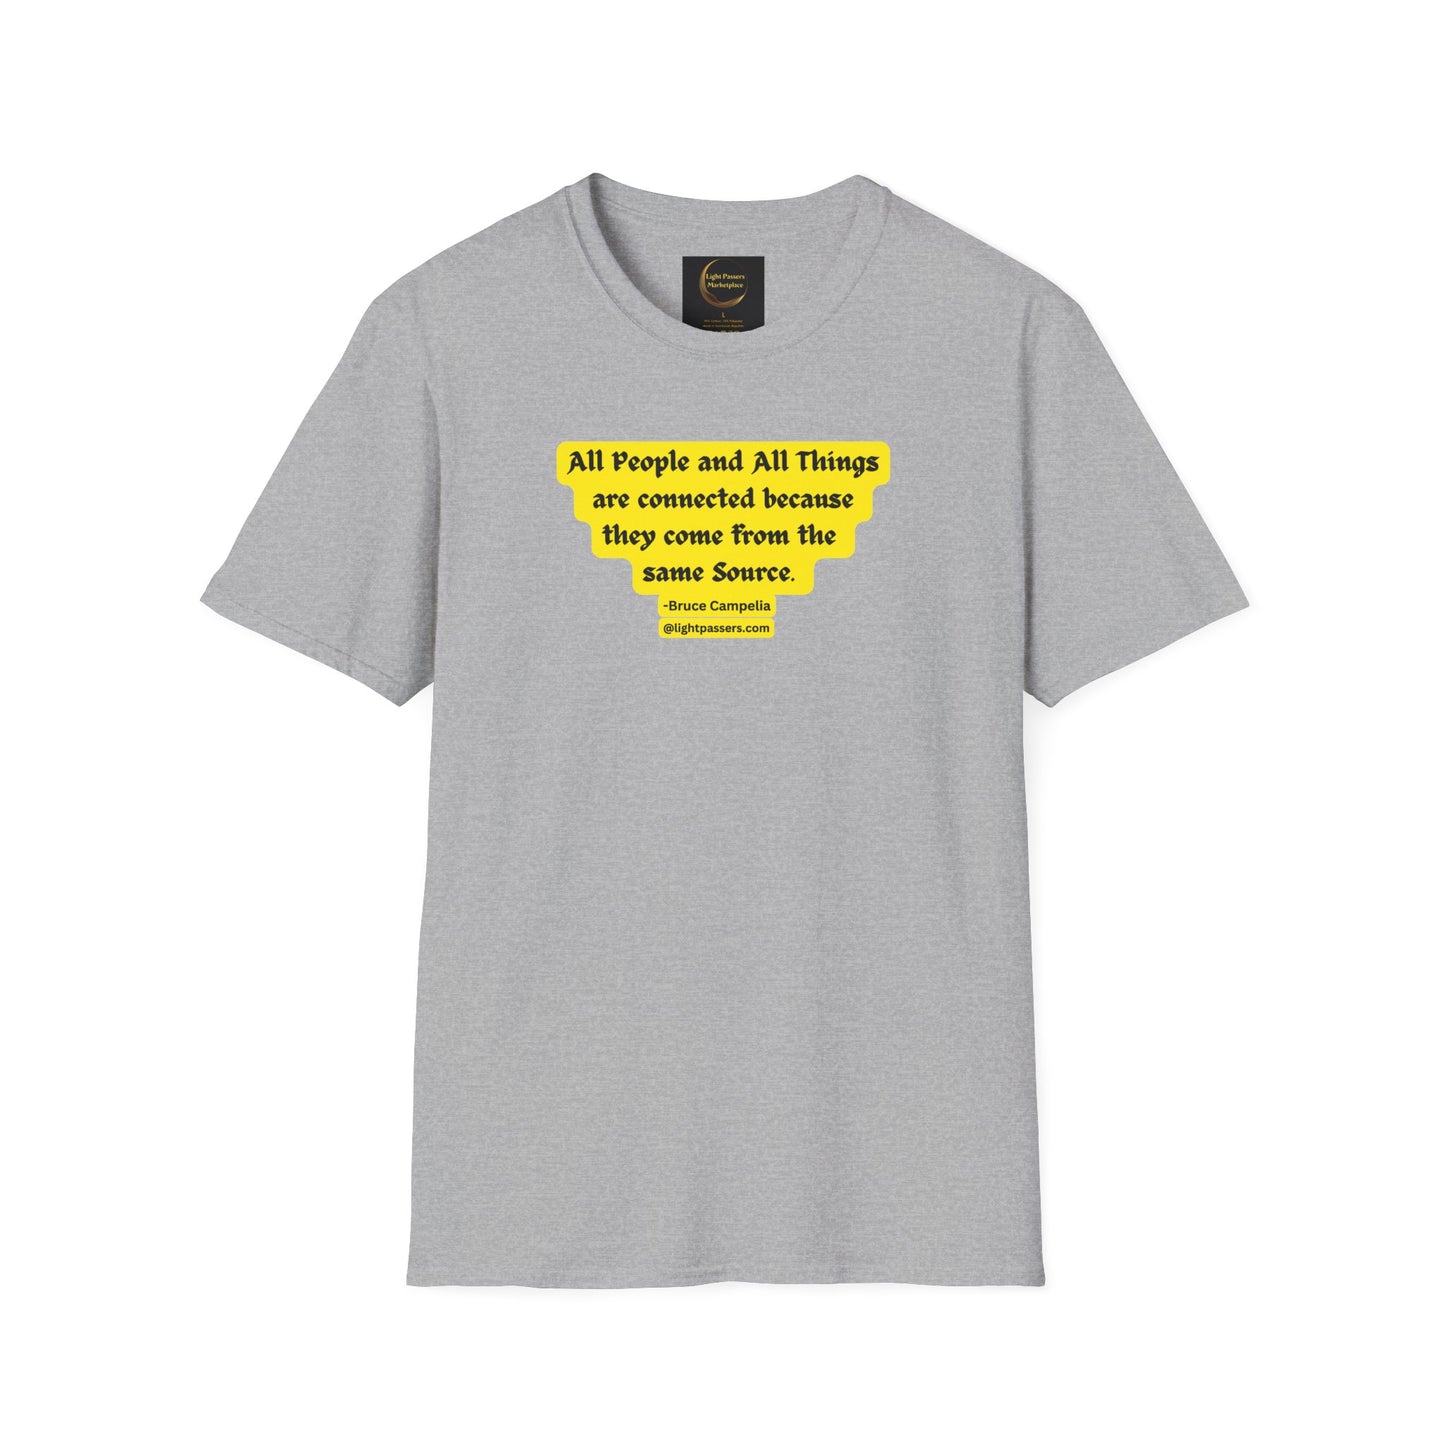 Light Passers Marketplace Yellow and Black All People are Connected Unisex  Soft Cotton T-shirt Inspirational Messages, Diversity, Mental Health